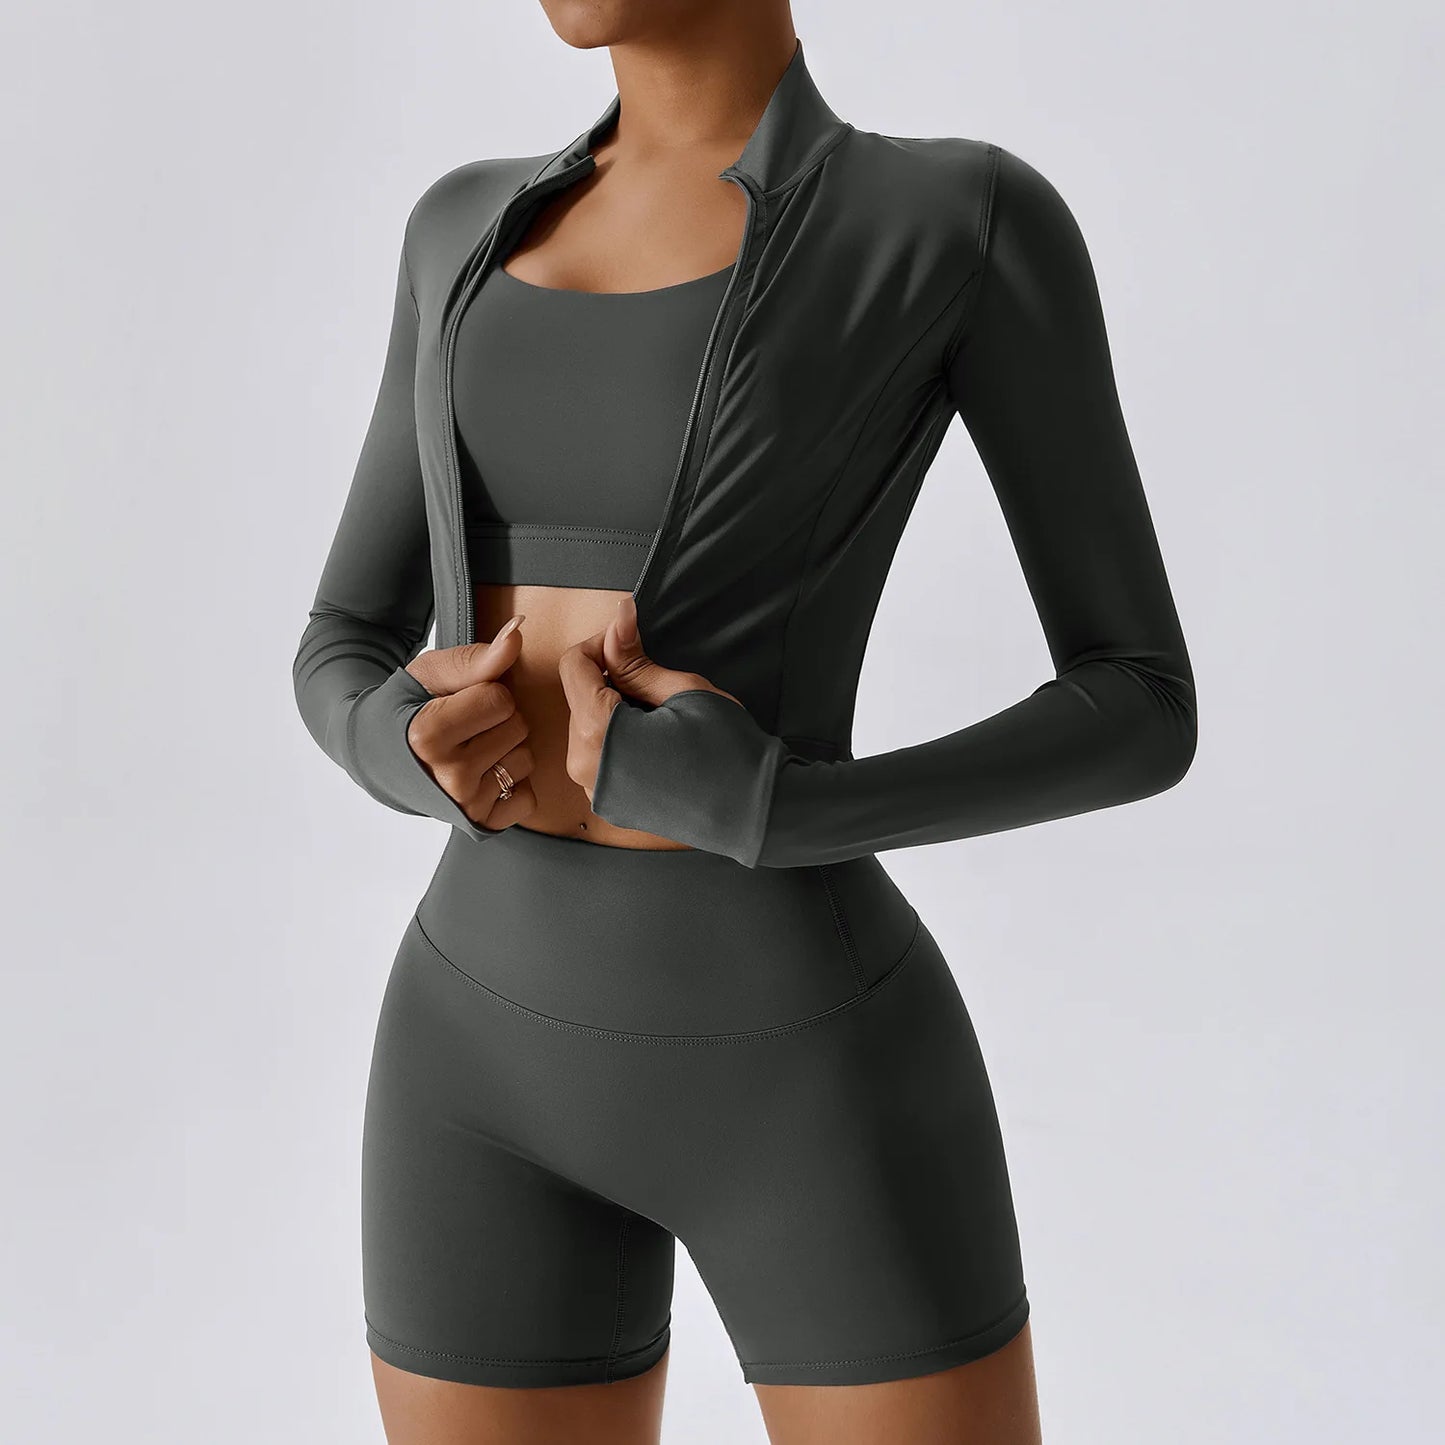 Chic Sports Top and Leggings Set - BEYOND FASHION